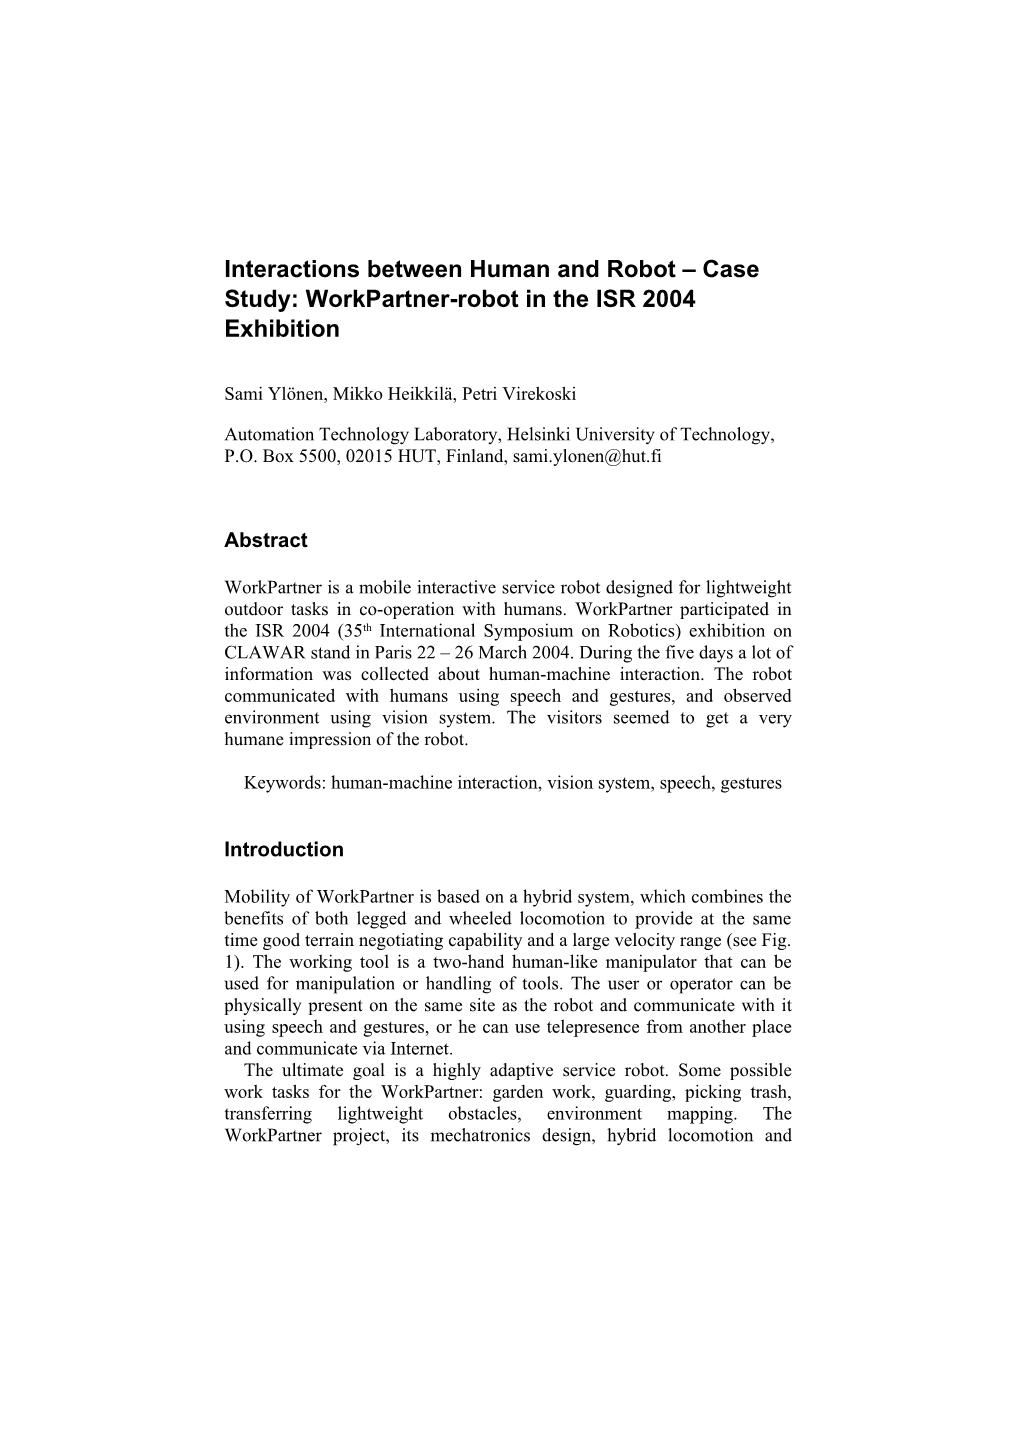 Interactions Between Human and Robot Case Study: Workpartner-Robot in the ISR 2004 Exhibition